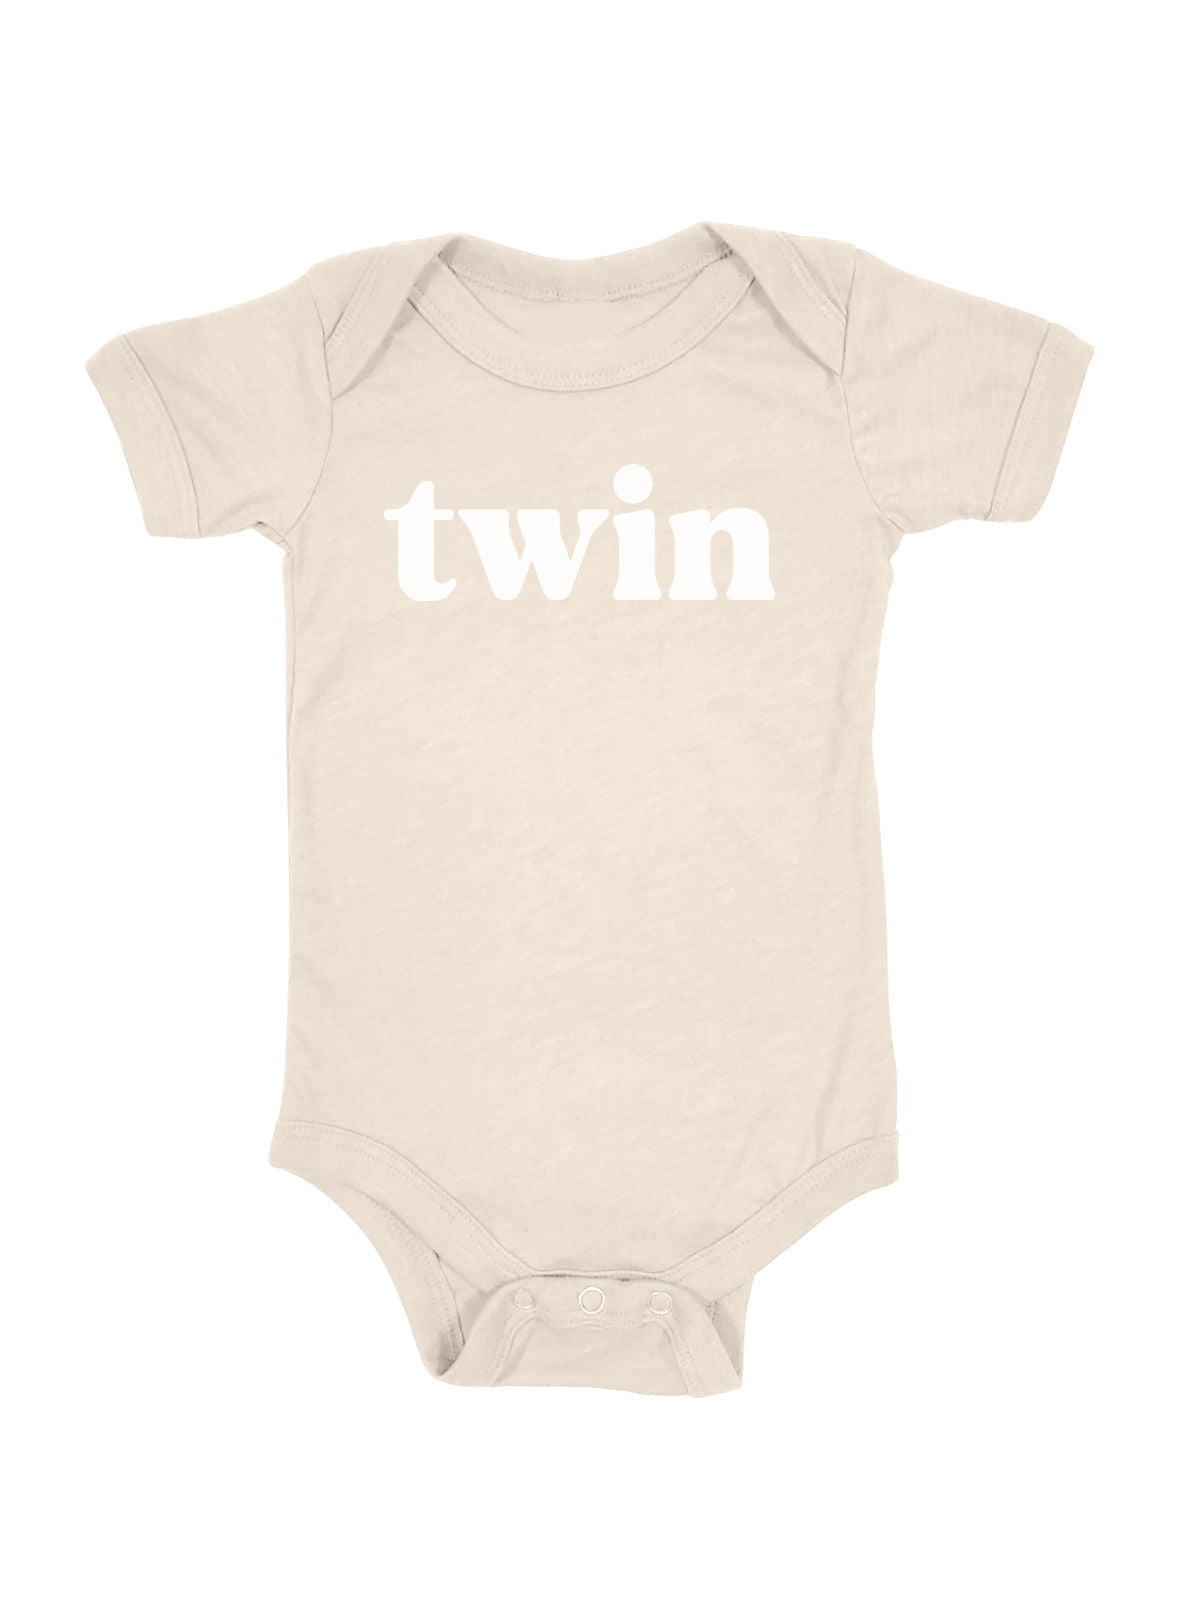 Twin Baby Bodysuit in Natural